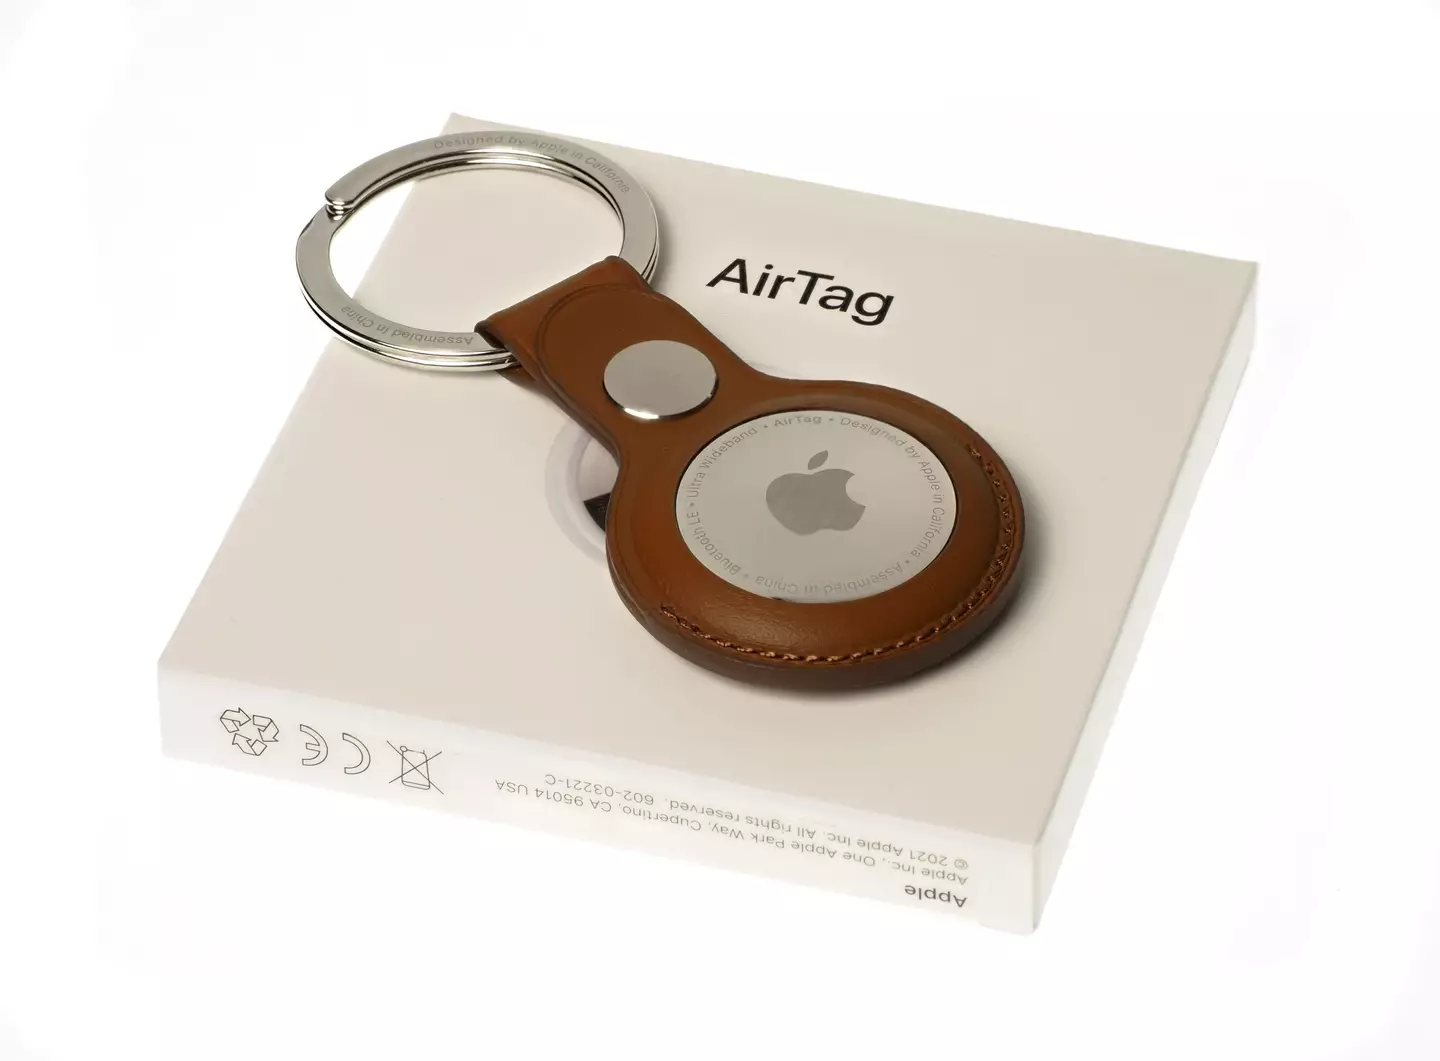 This is the Apple AirTag, a tracking device which unfortunately has been used by thieves and stalkers.